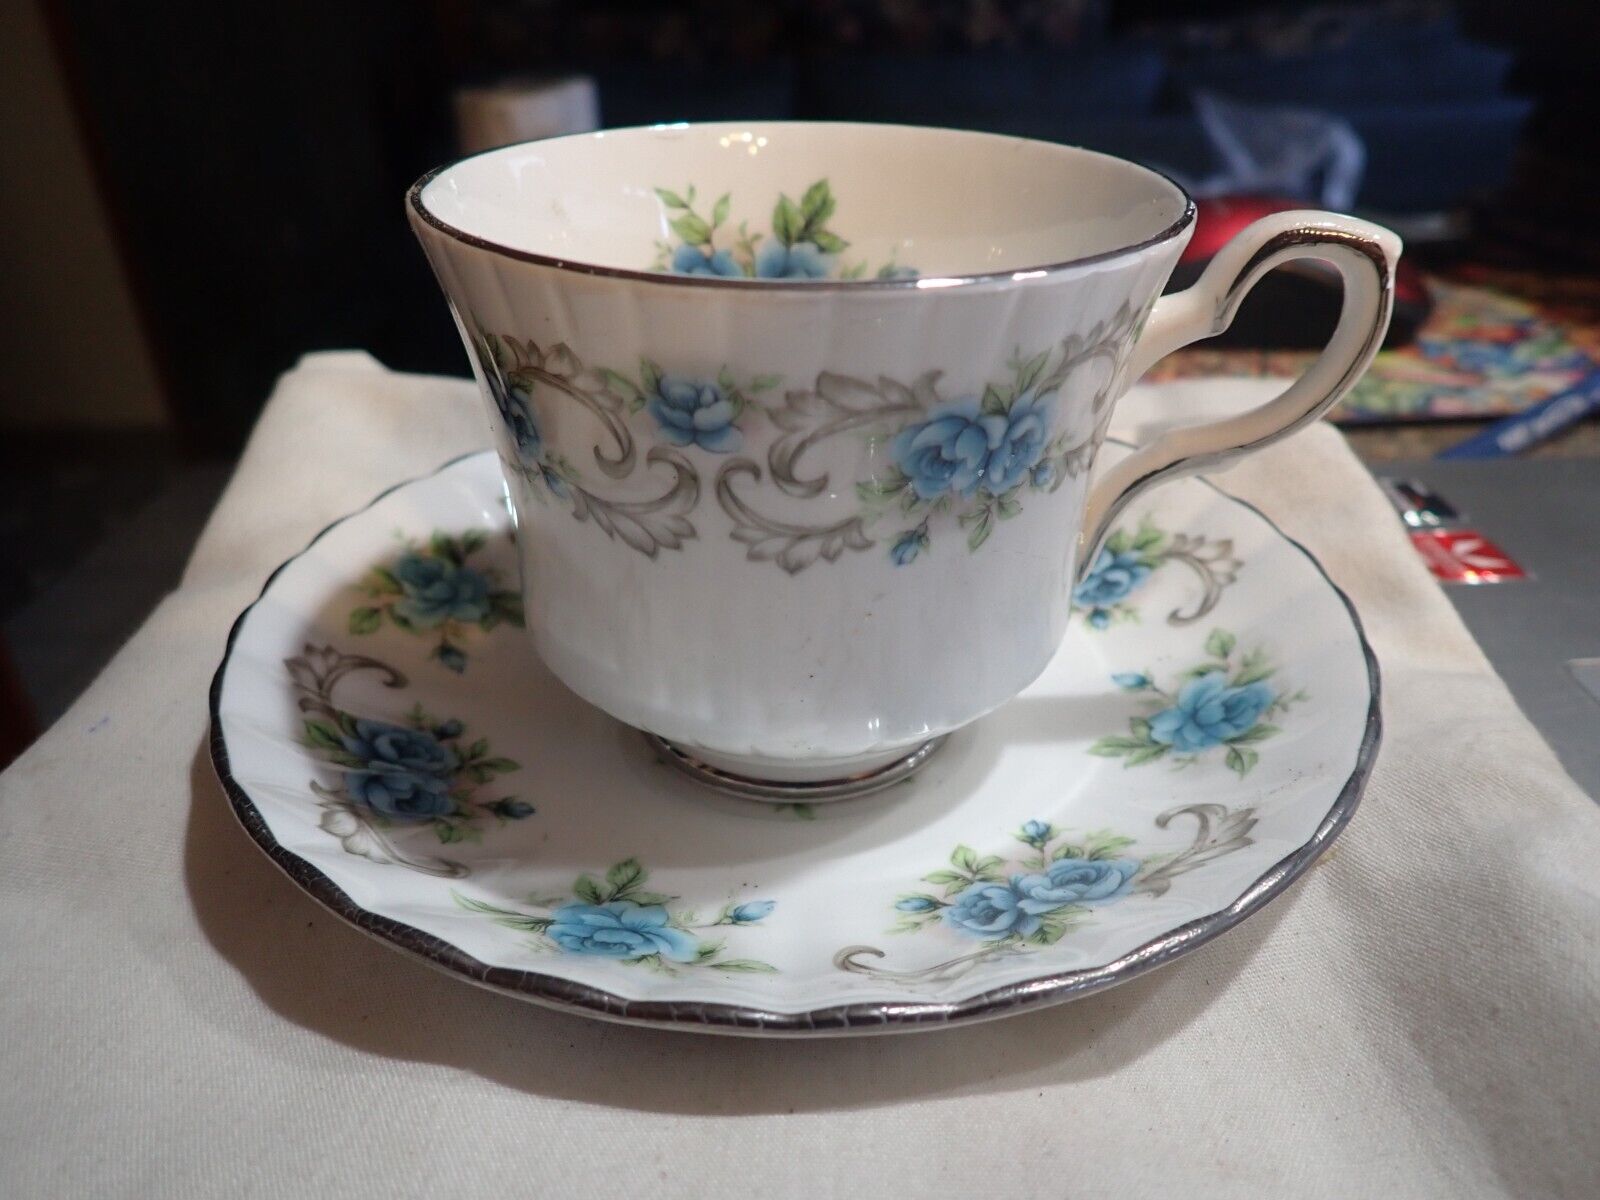 LOVELY ROYAL STAFFORD TEA CUP & SAUCER Blue FLORAL BONE CHINA ENGLAND